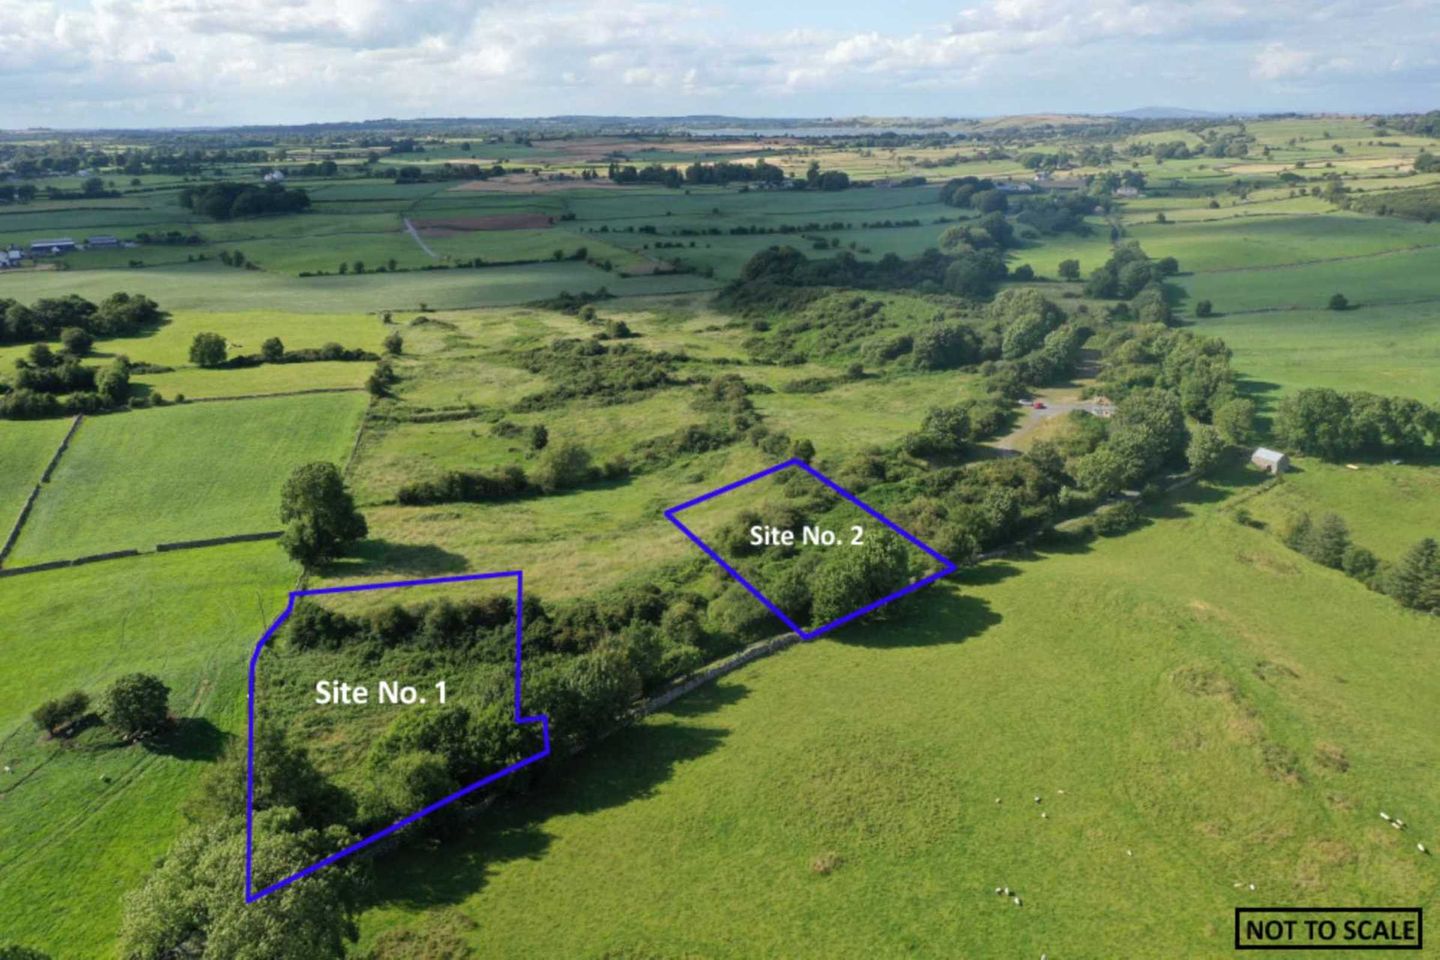 c. 0.67 Acre Site at Gortnasythe, Curraghboy, Co. Roscommon